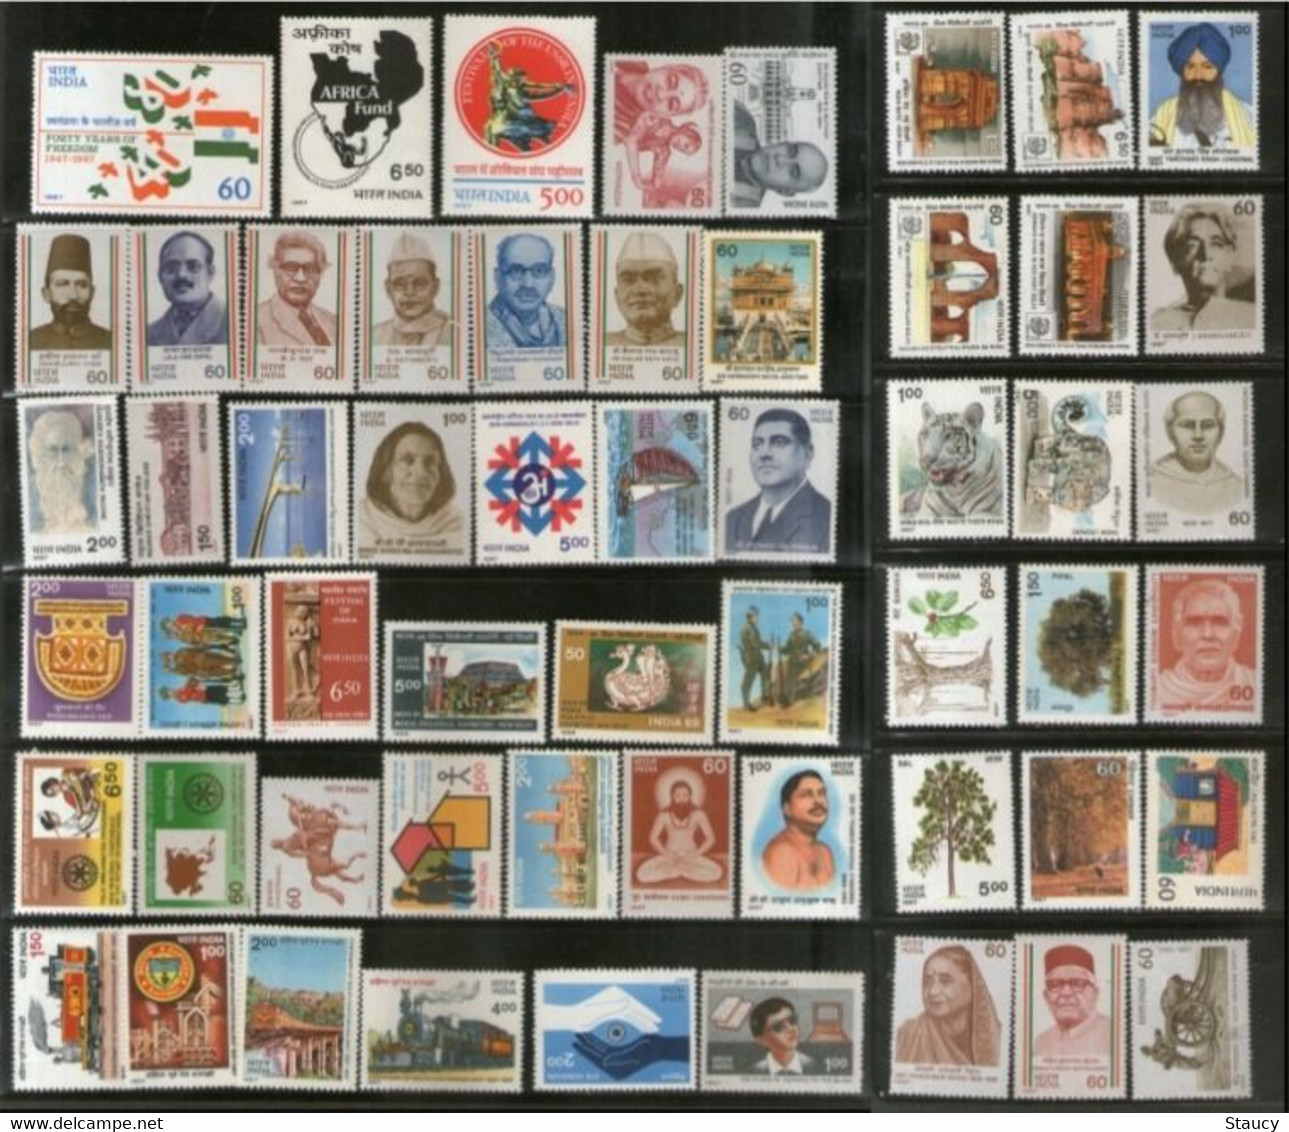 India 1987 Complete Year Pack / Set / Collection Total 56 Stamps (No Missing) MNH As Per Scan - Annate Complete